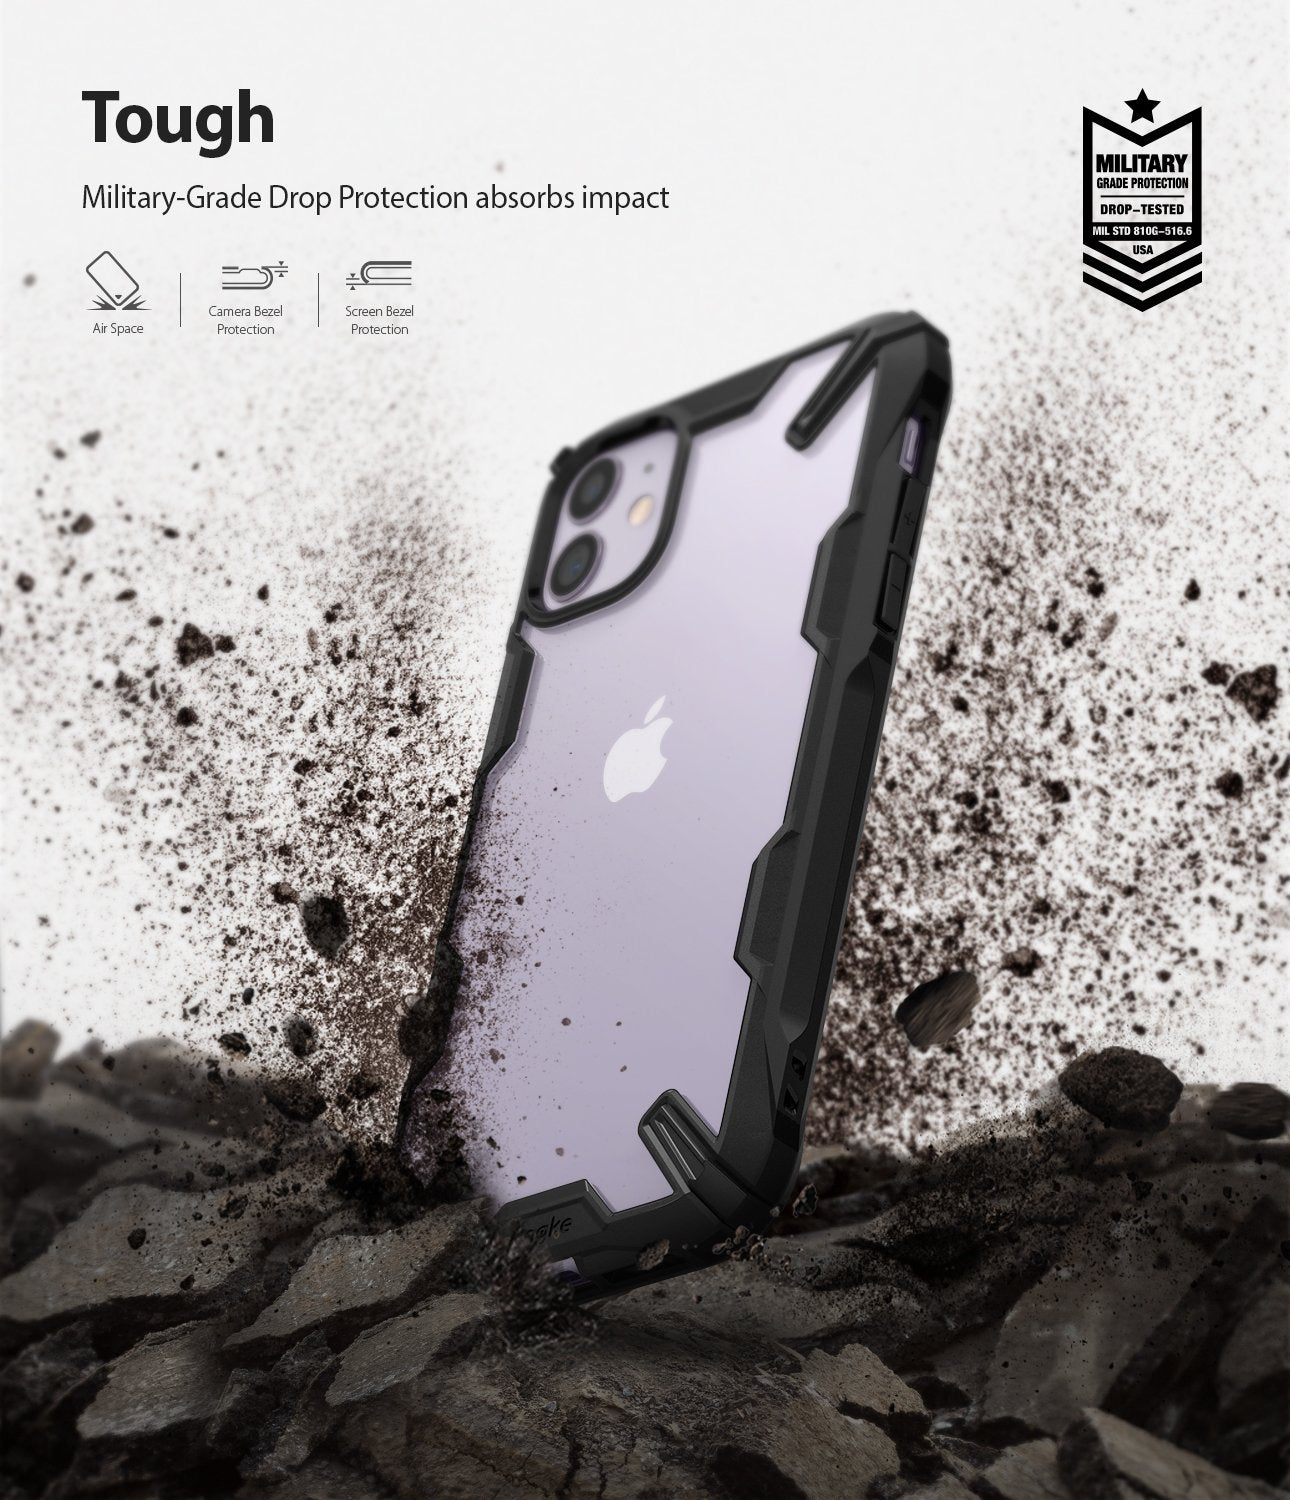 Ringke Fusion-X designed for iPhone 11 Tough Drop Protection